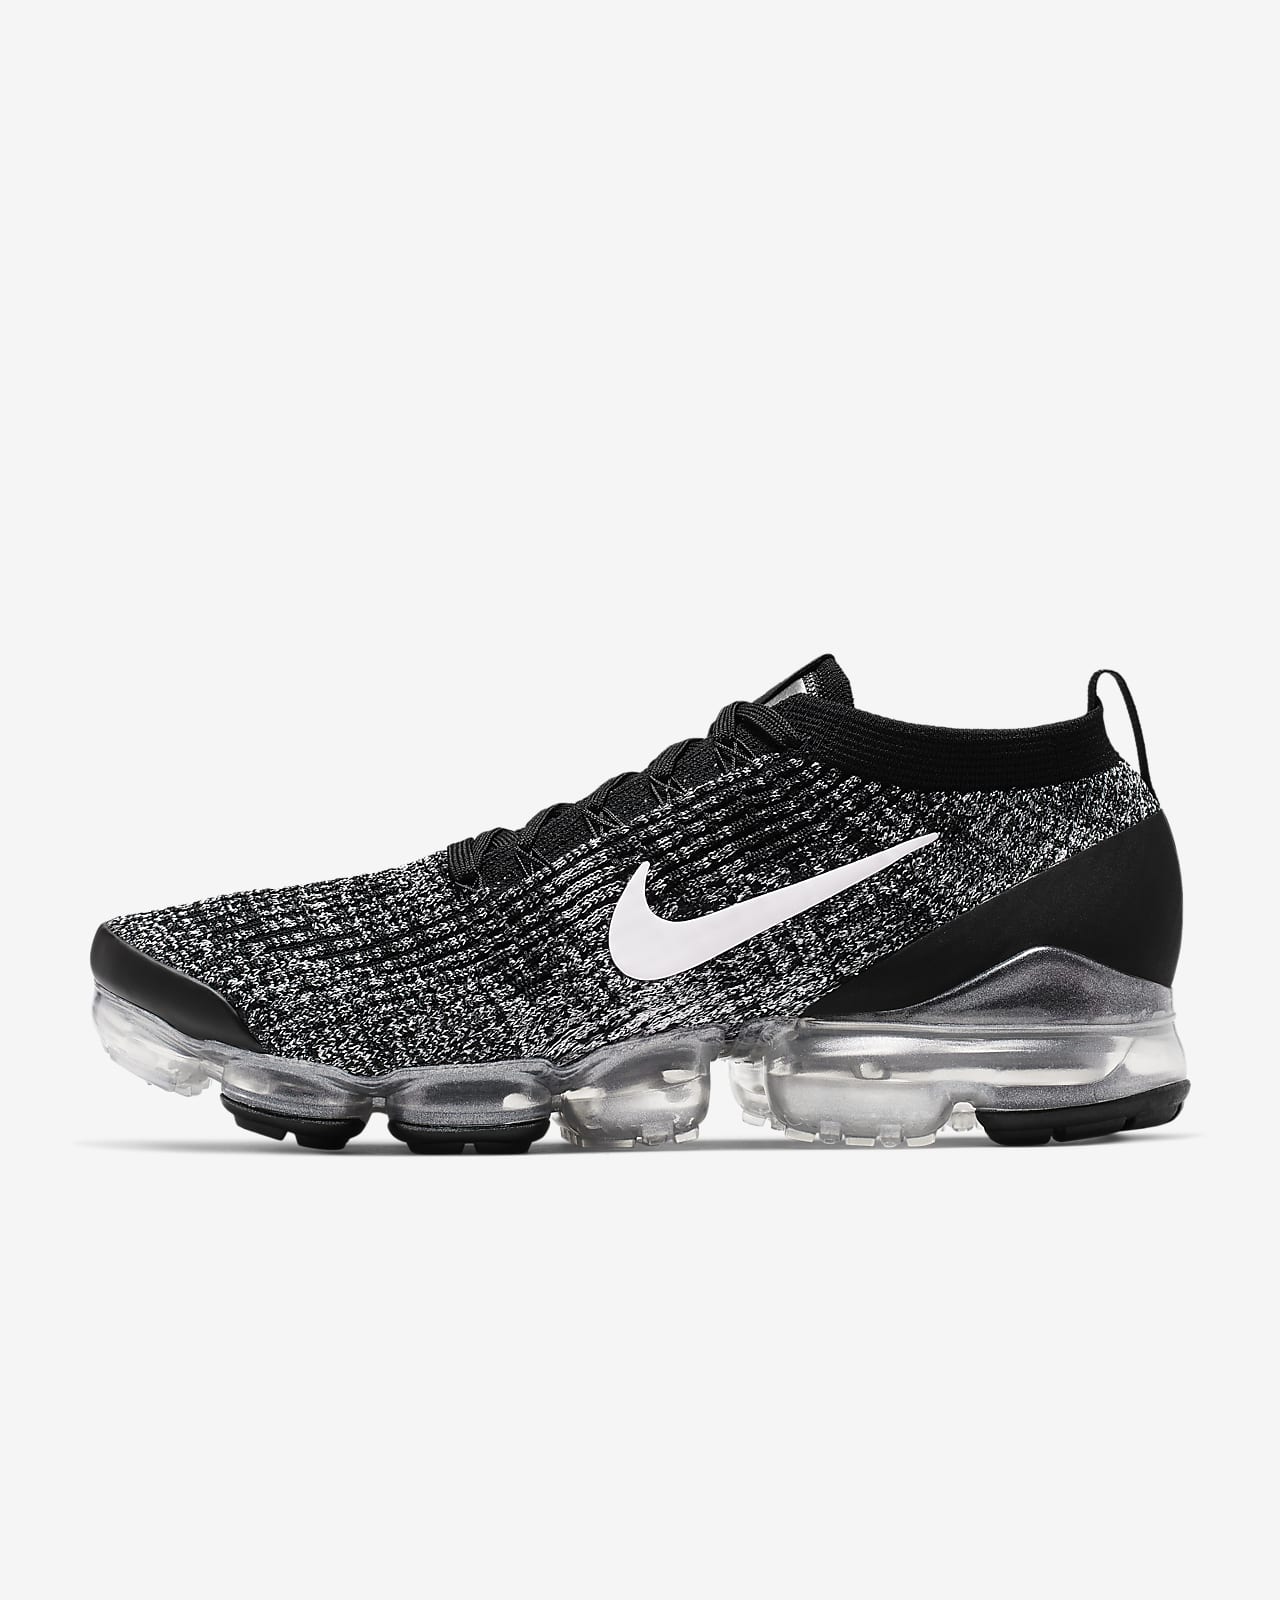 nike air vapormax flyknit 3 one of one